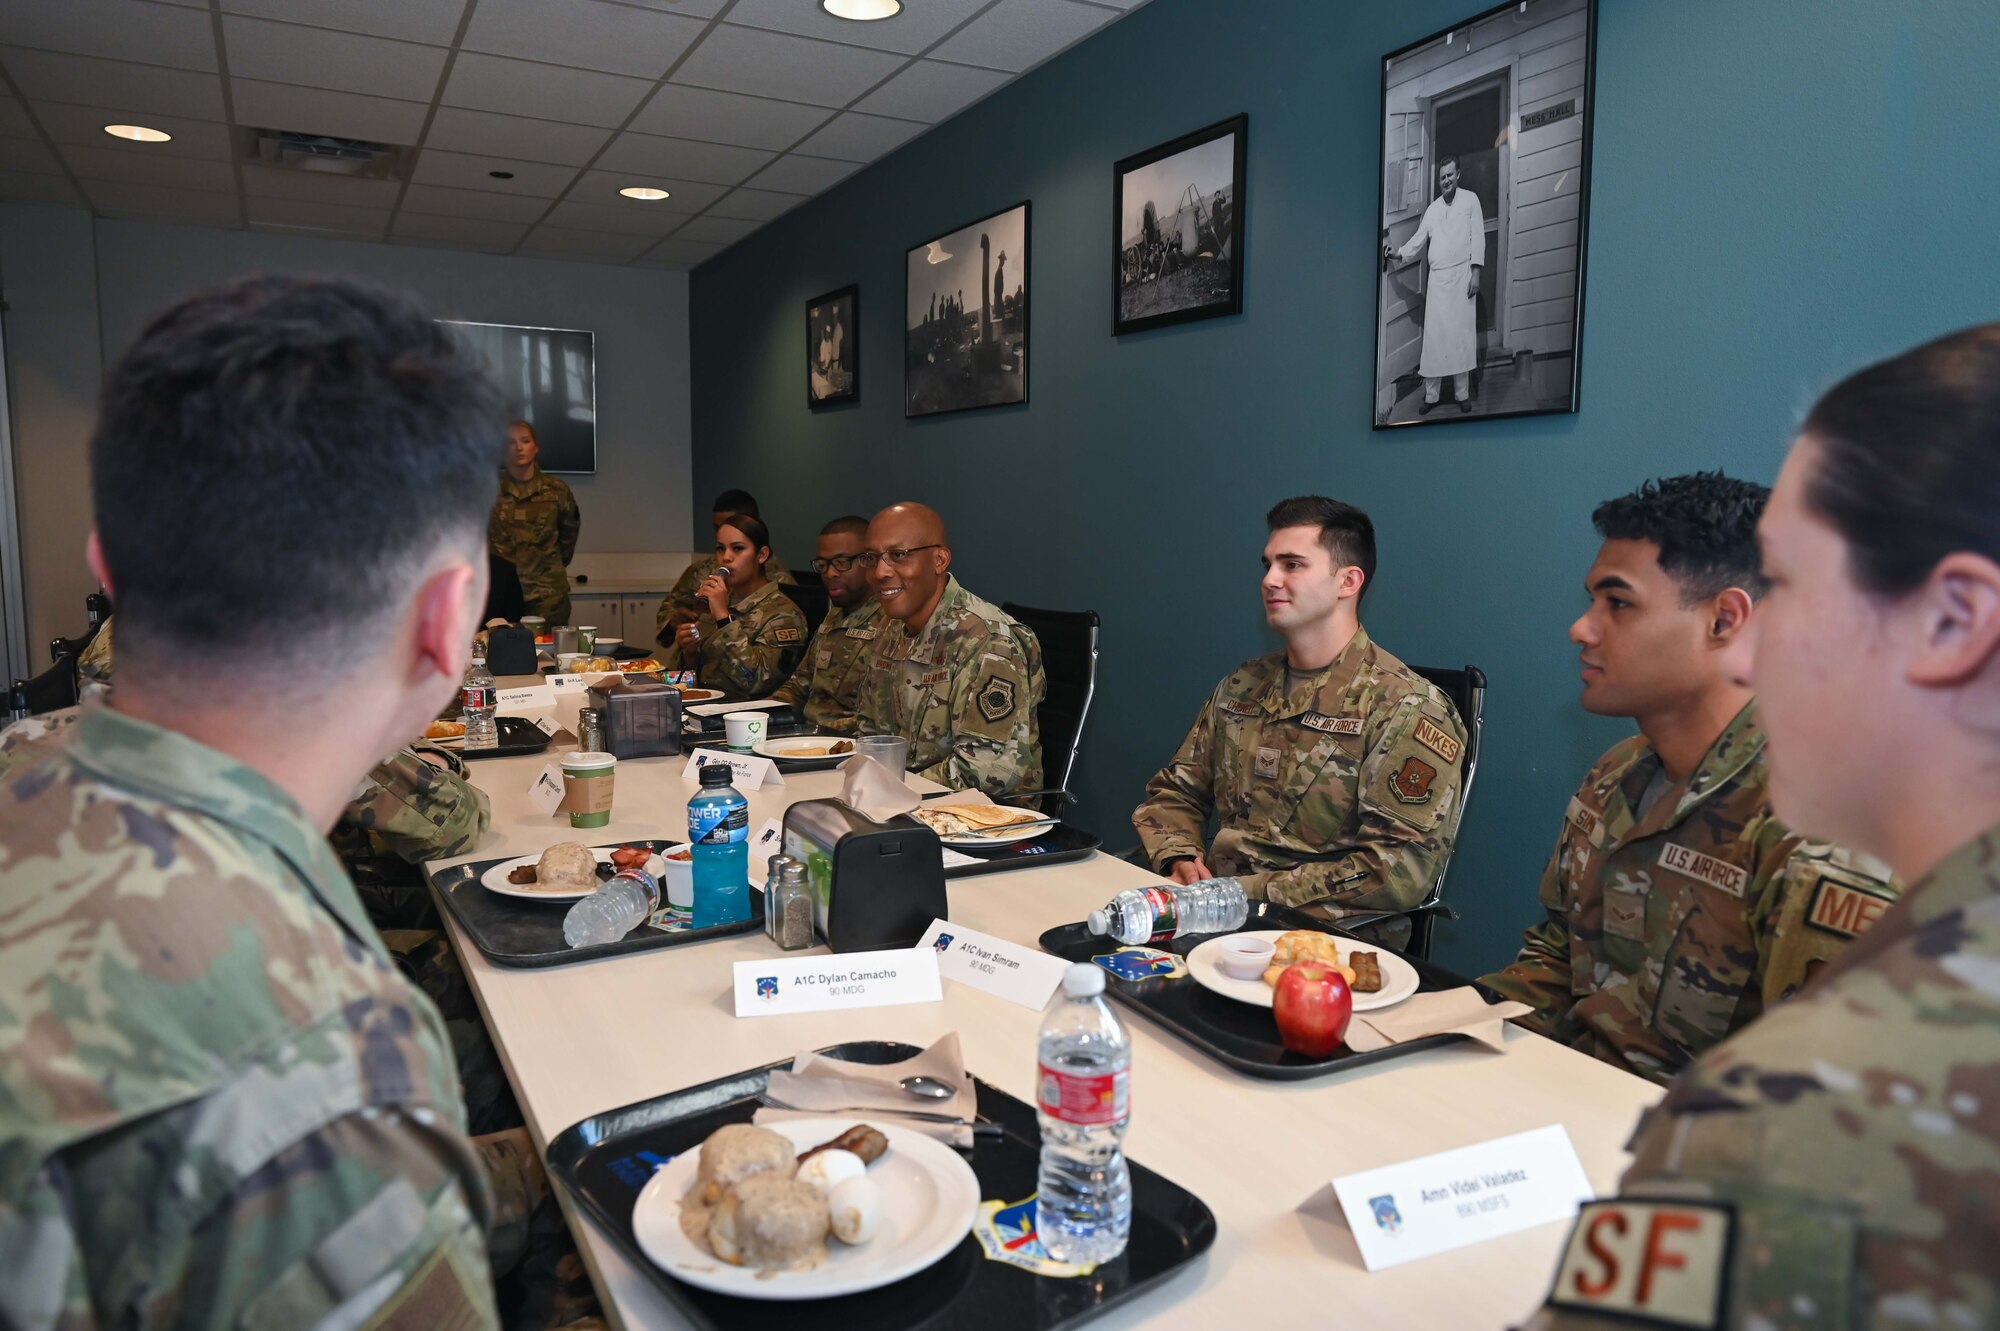 airmen and CSAF having breakfast and discussing topics important to airmen